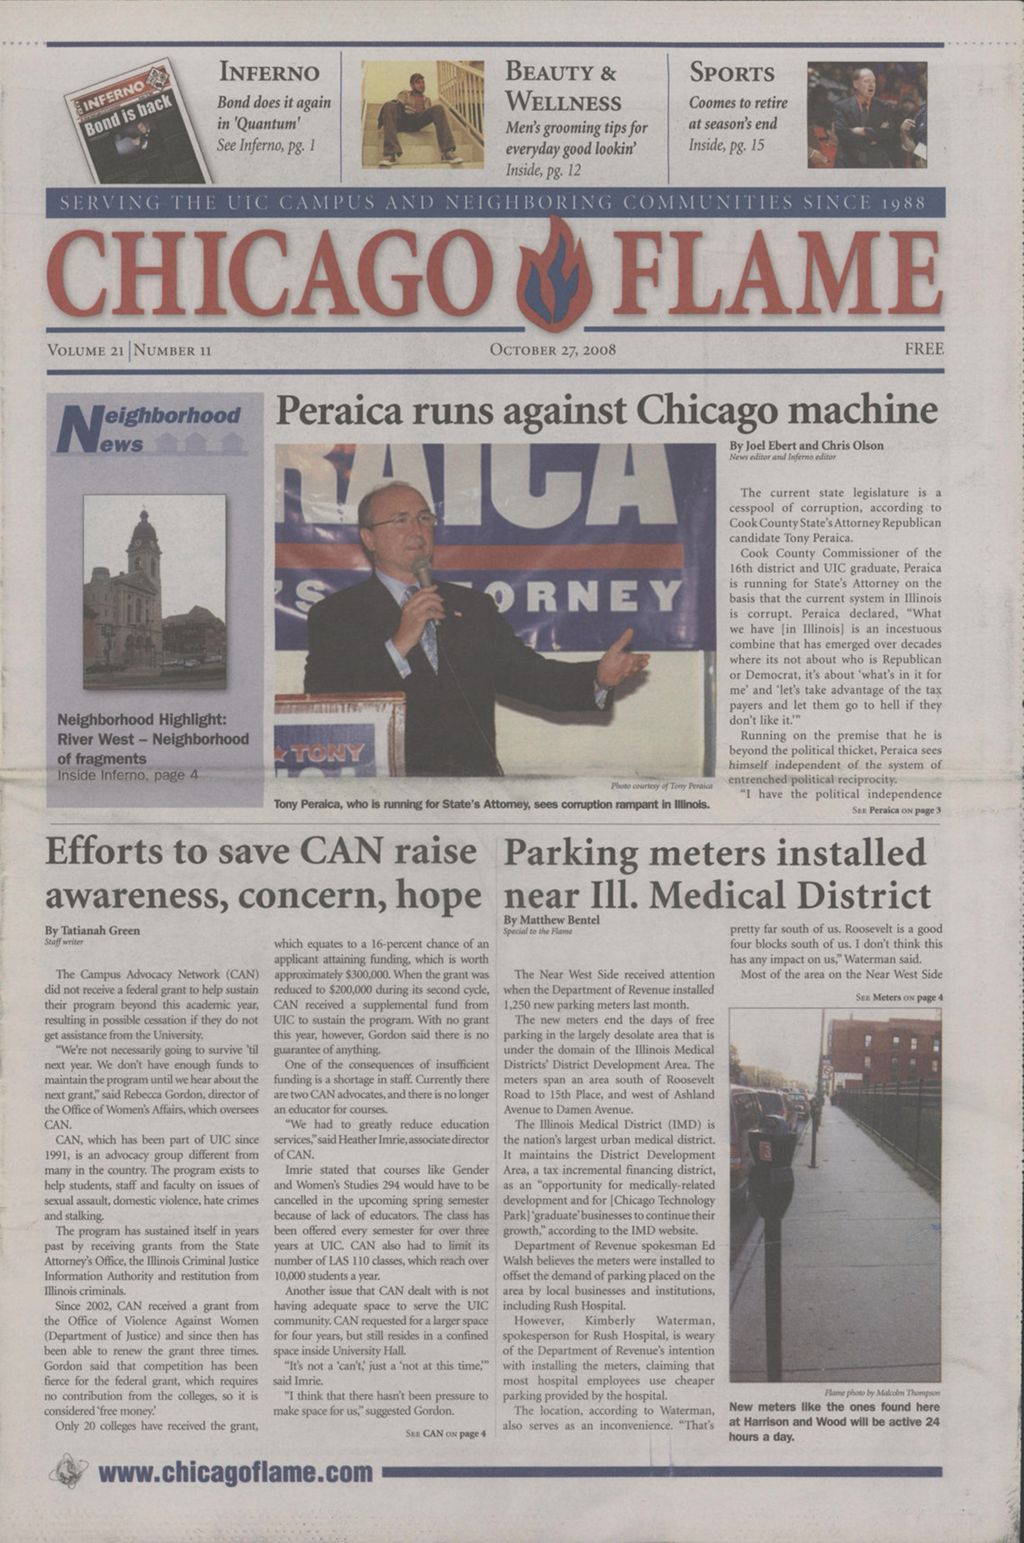 Miniature of Chicago Flame (October 27, 2008)